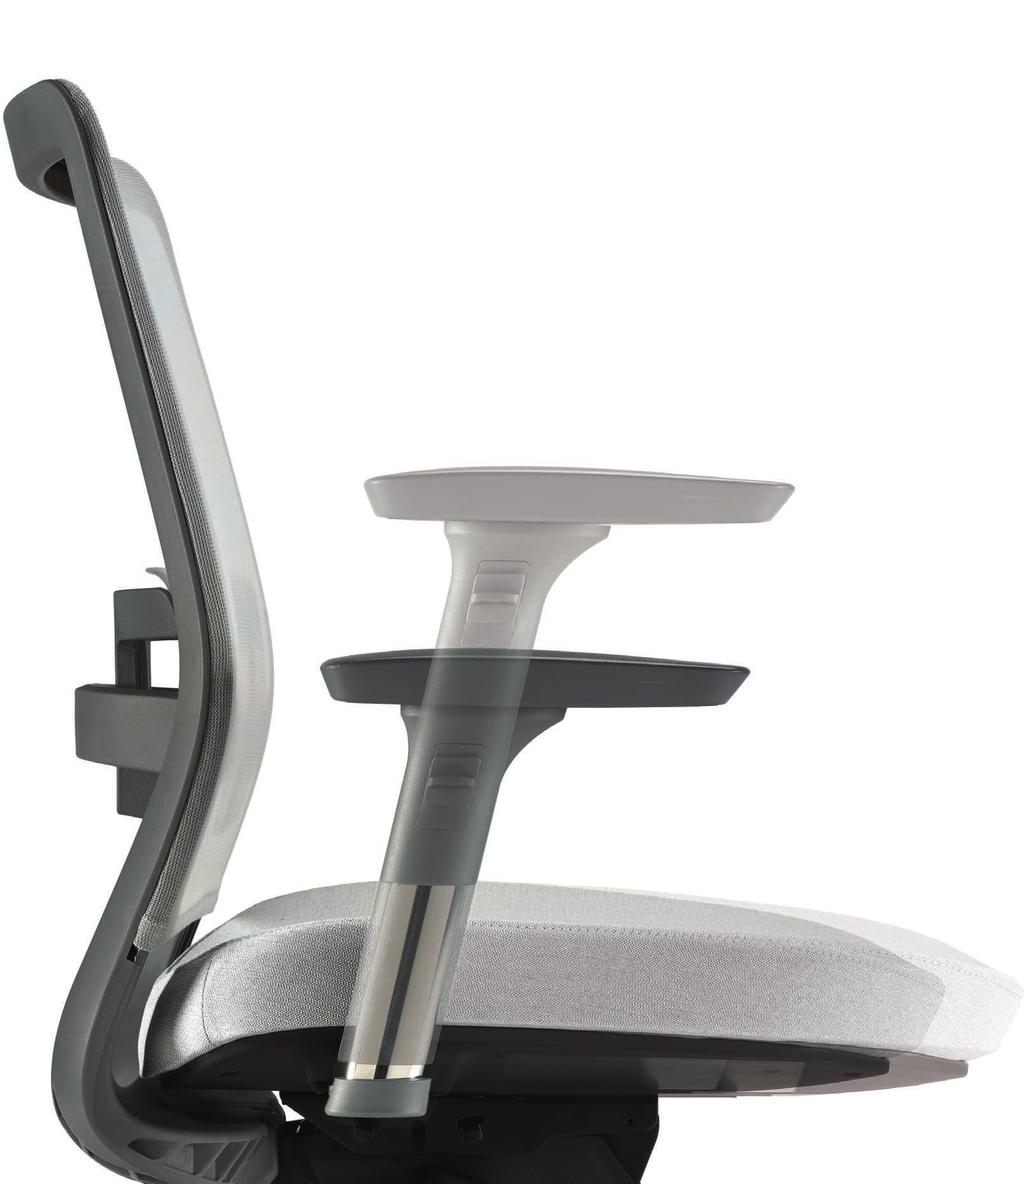 Adjusts to your day Raise or lower to support your forearms with optional height adjustable arms and height adjustable